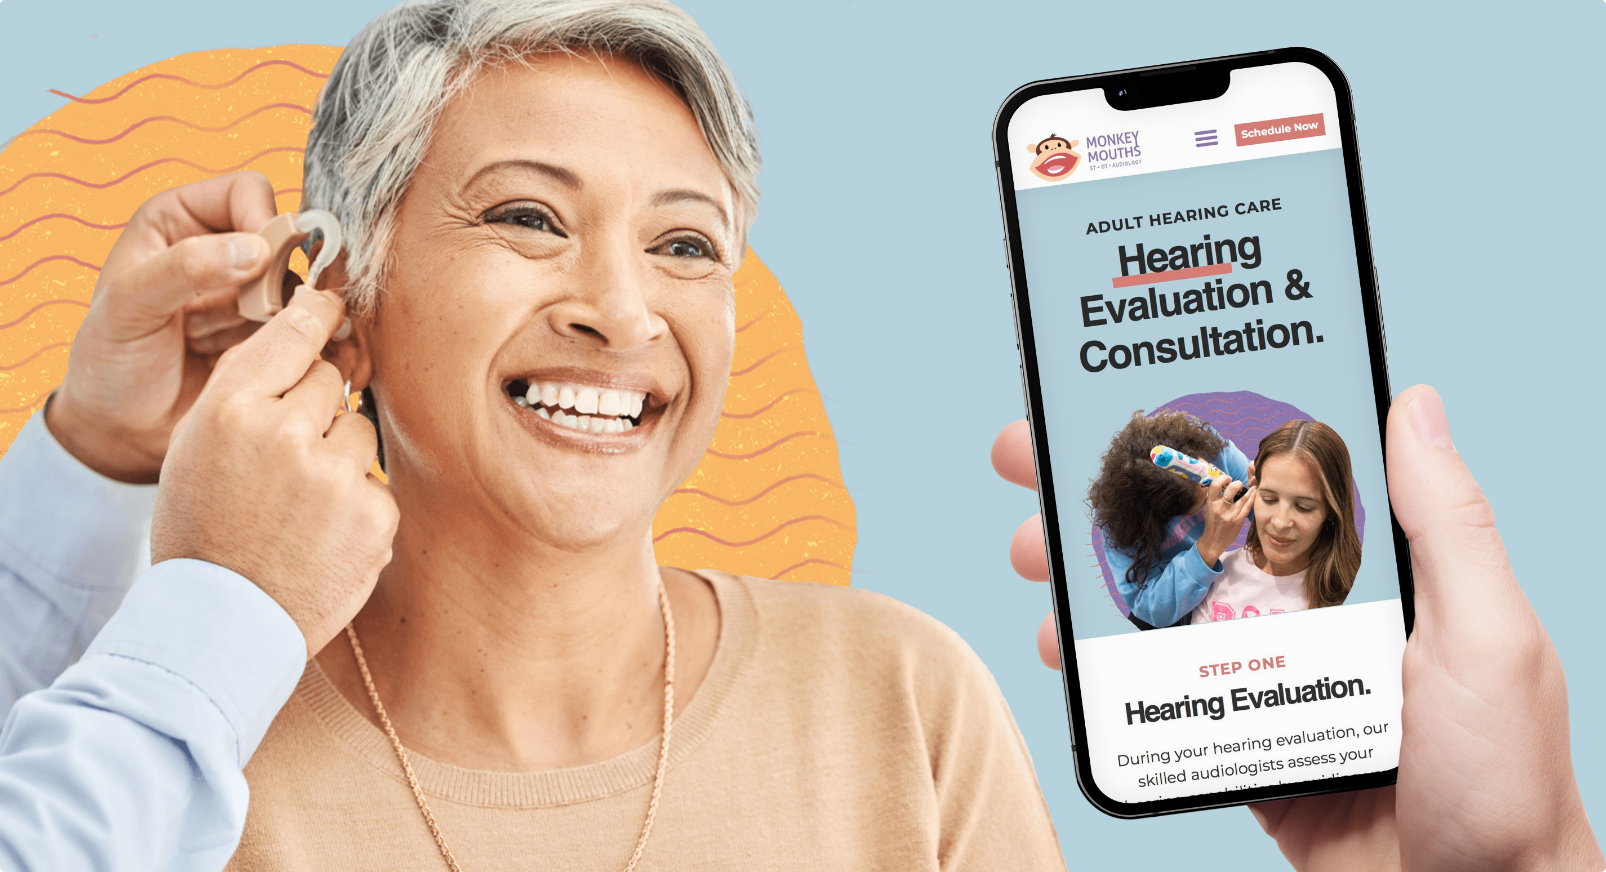 Monkey Mouths' colorful, modern audiology website design on phone and woman with hearing aid